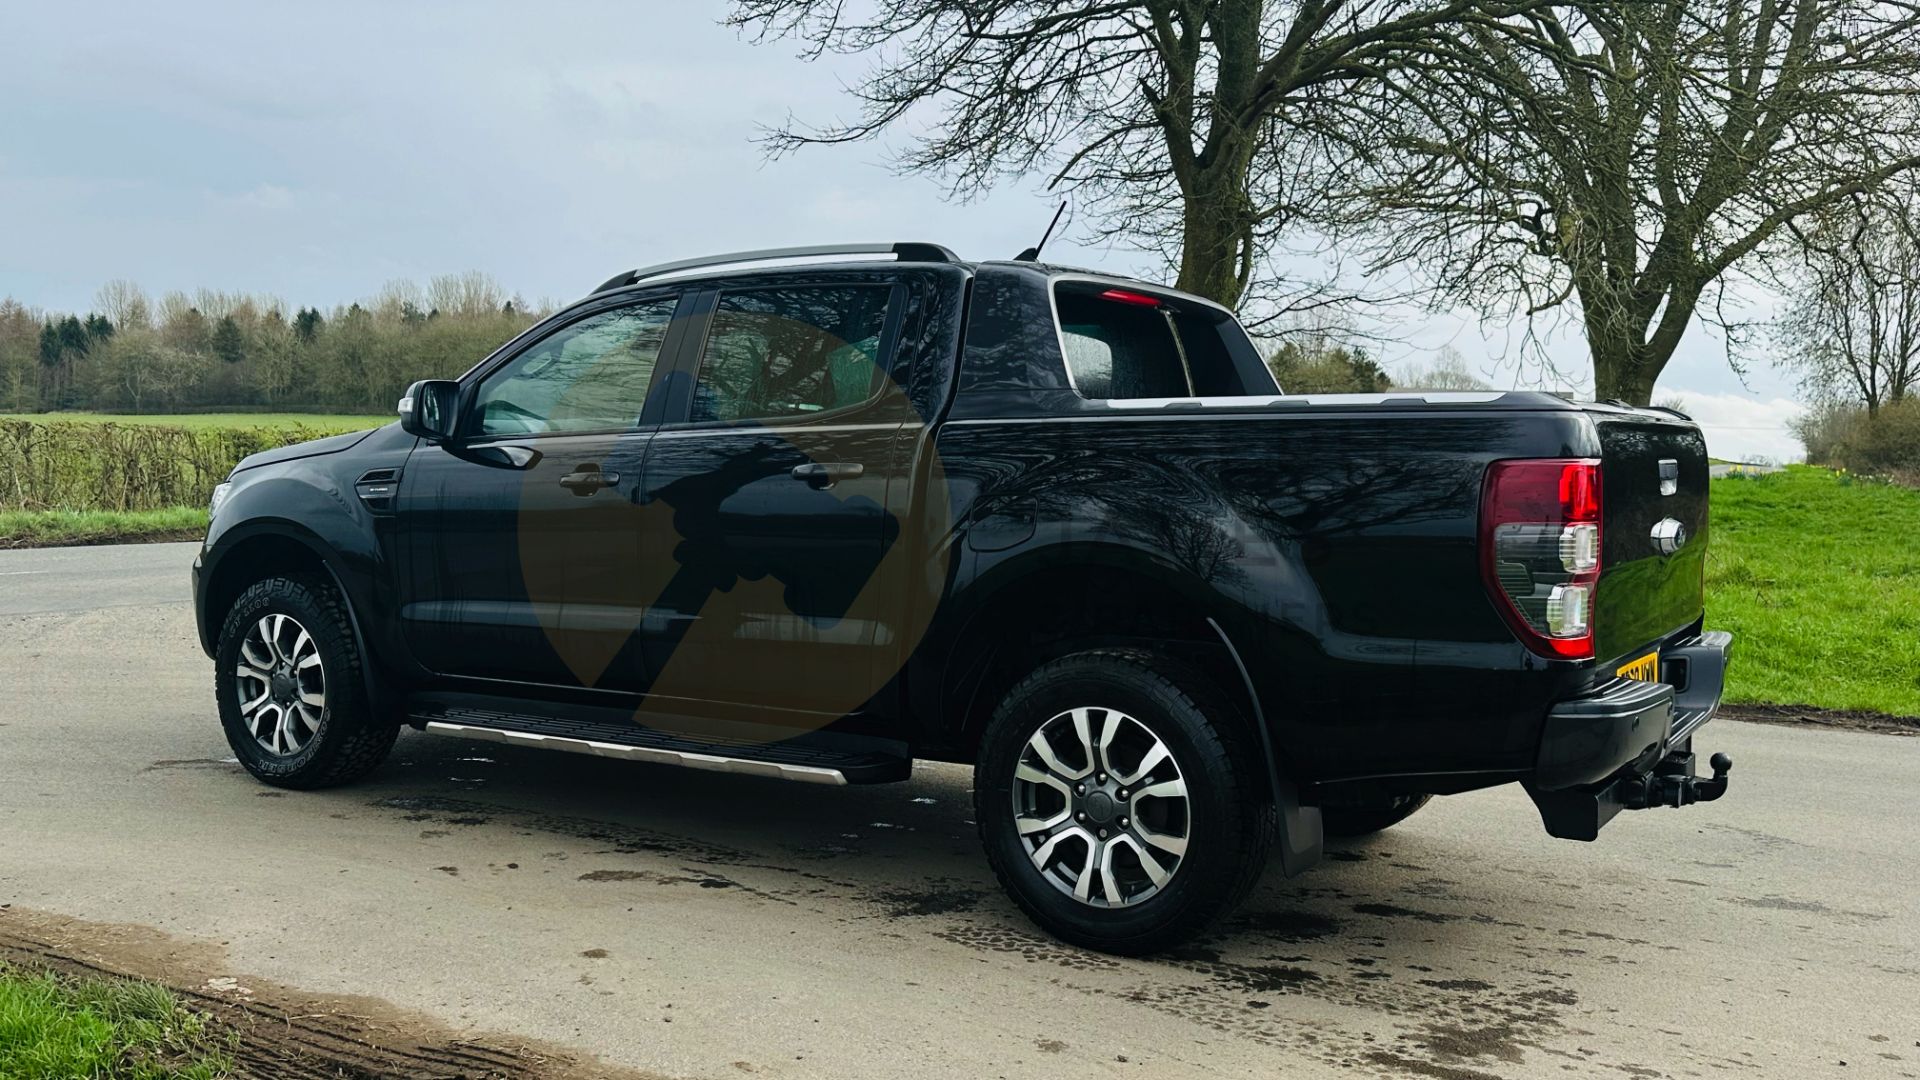 FORD RANGER *WILDTRAK* DOUBLE CAB PICK-UP (2020 - FACELIFT MODEL) 2.0 TDCI 'ECOBLUE' - 10 SPEED AUTO - Image 9 of 45